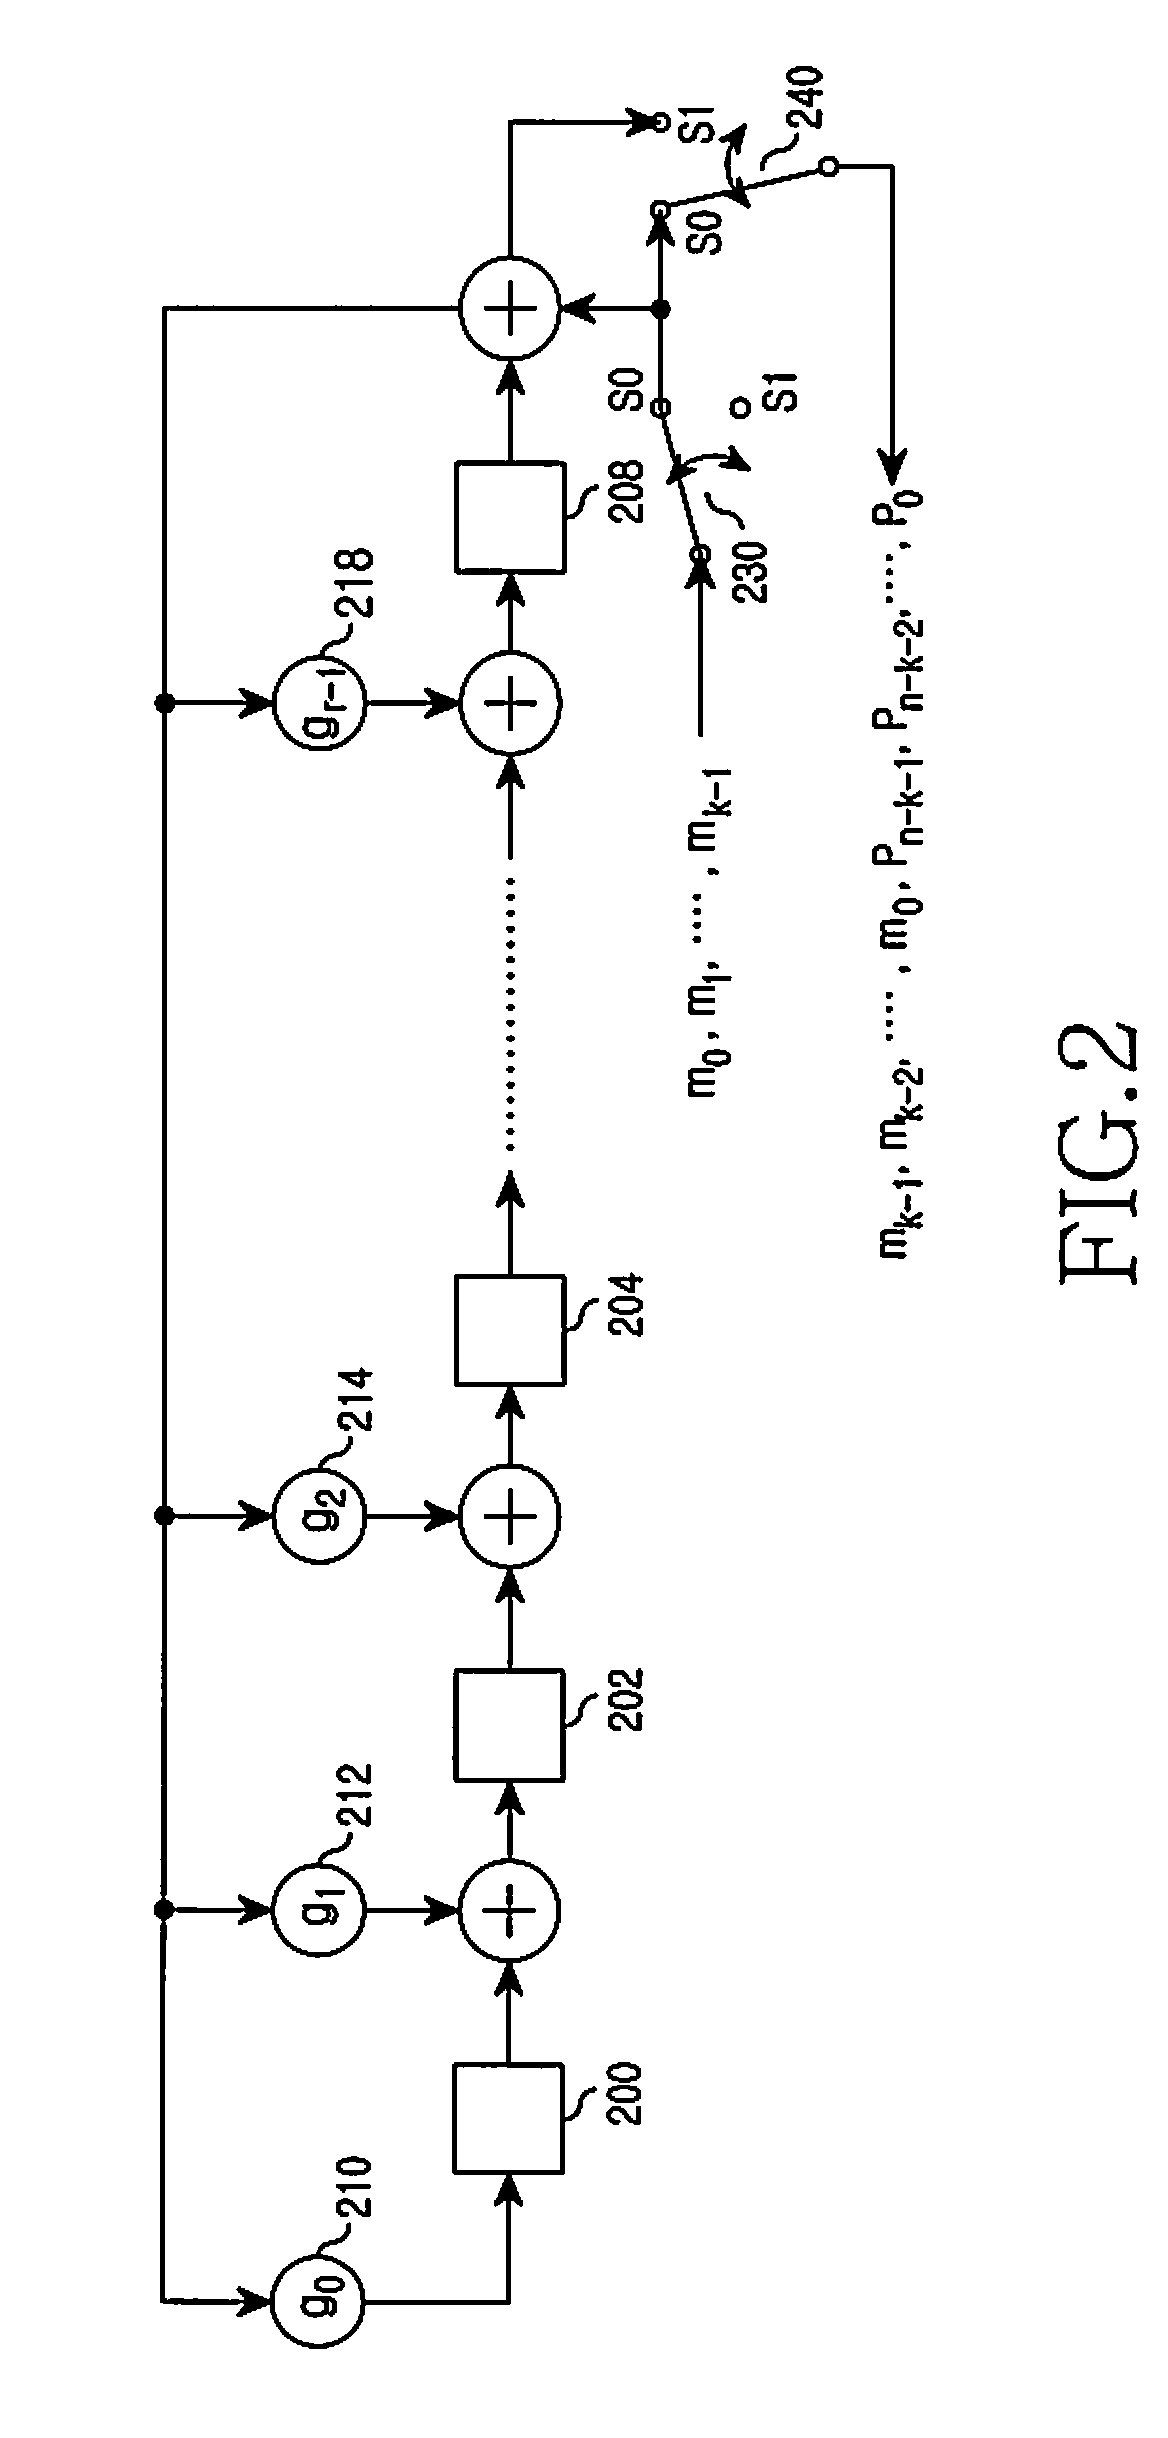 Method and apparatus for cyclic redundancy check in communication system